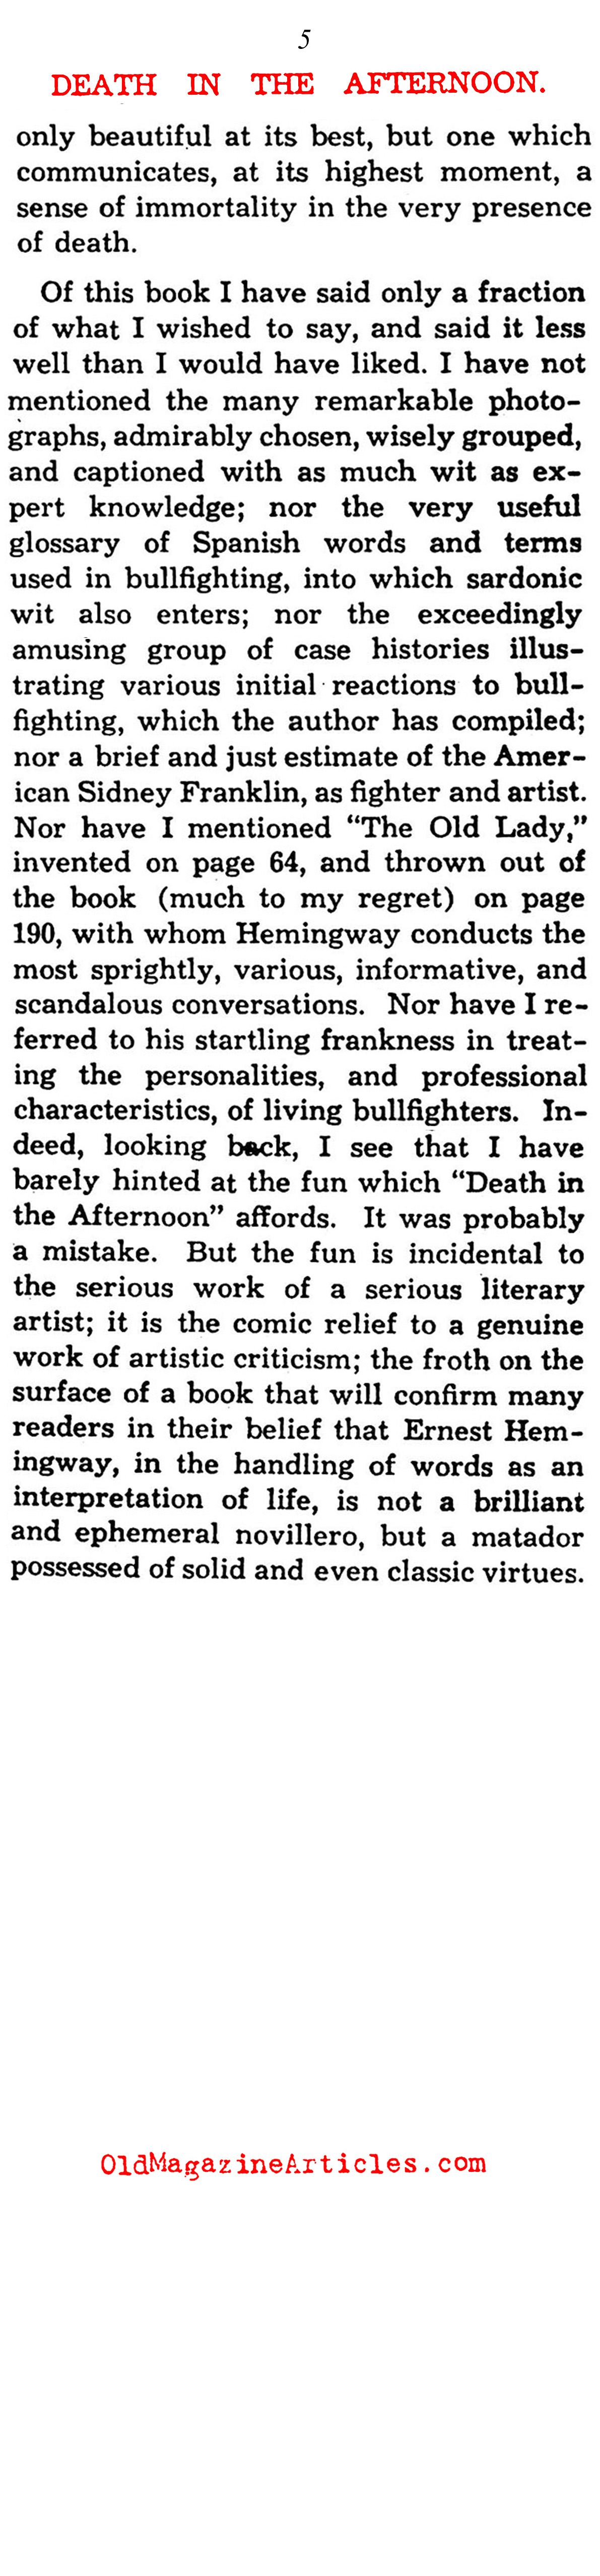 Hemingway's <I>Death in the Afternoon</I> (Saturday Review of Literature, 1932)